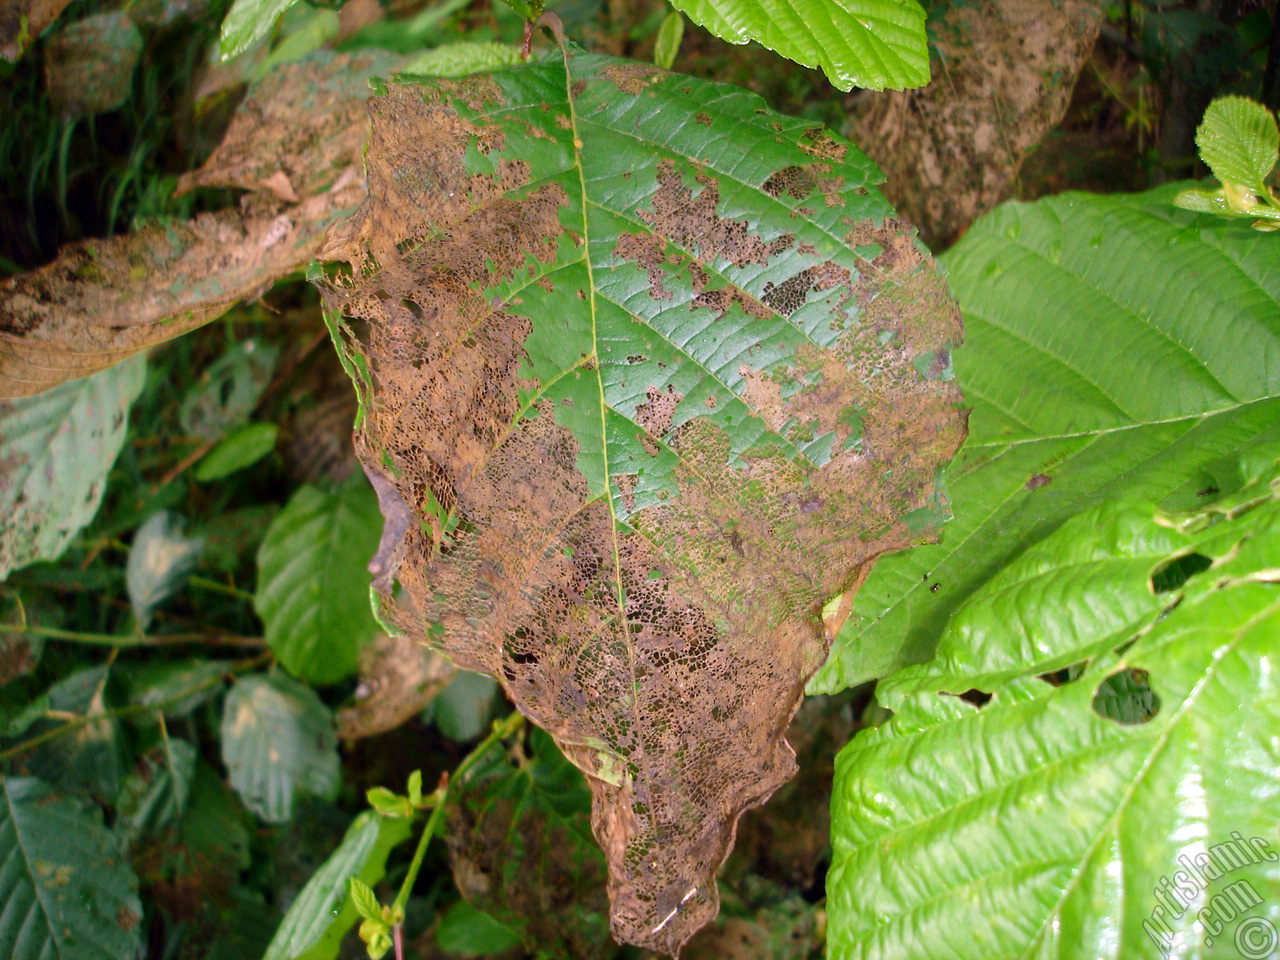 A plant with wormy leaves.
